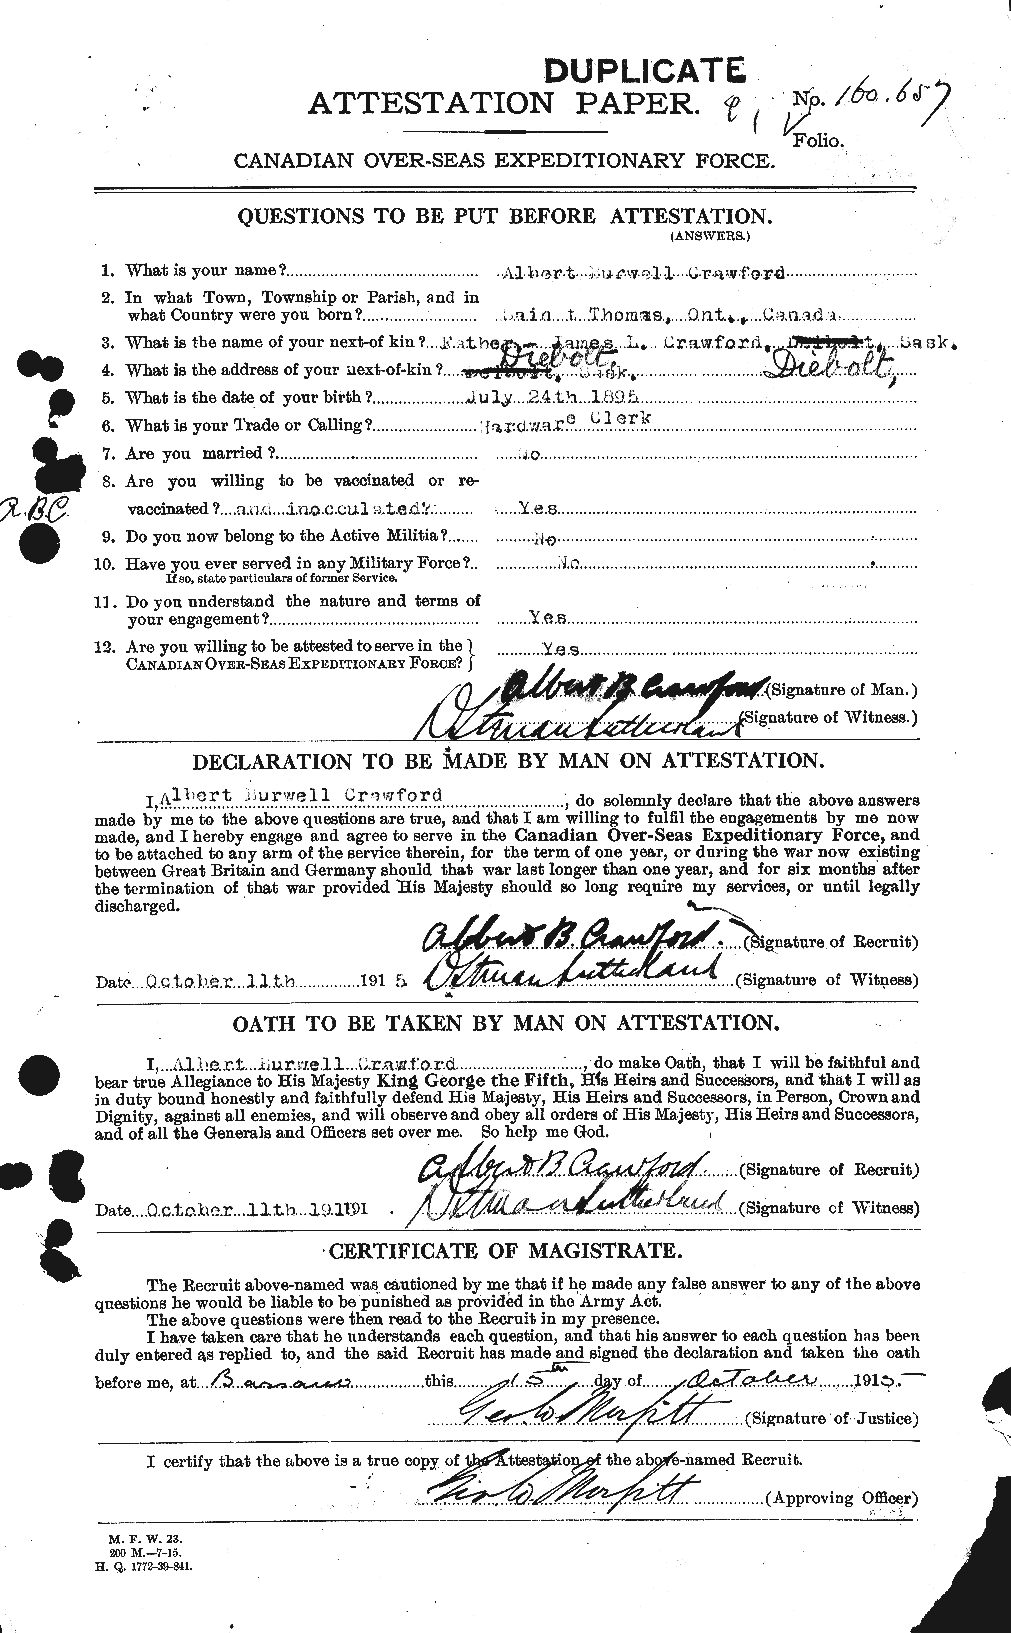 Personnel Records of the First World War - CEF 061022a